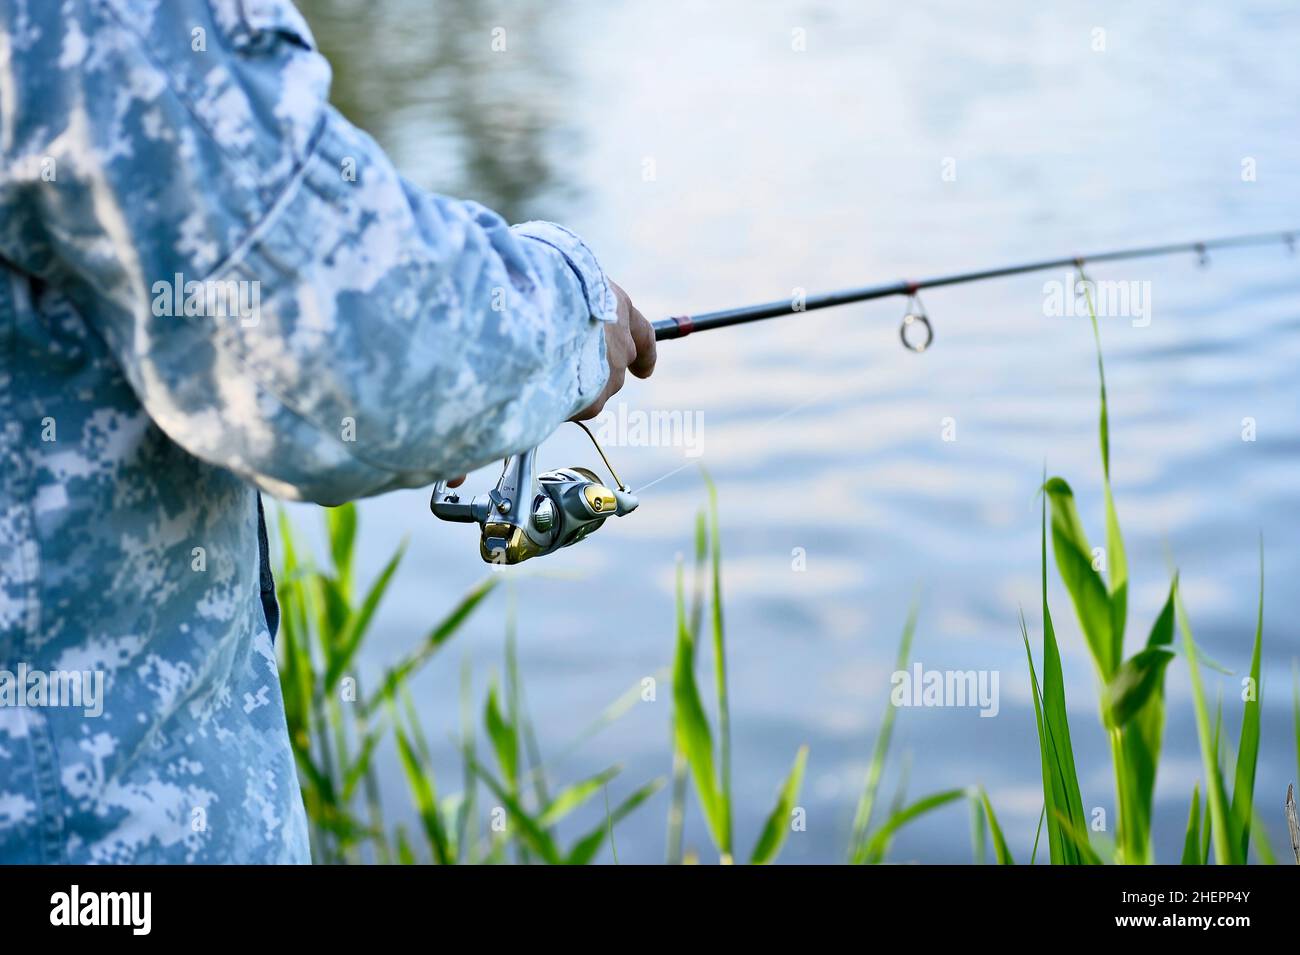 https://c8.alamy.com/comp/2HEPP4Y/fisherman-catching-predatory-fish-spinning-in-the-summer-rear-and-side-view-of-the-fishing-reel-in-close-up-background-2HEPP4Y.jpg